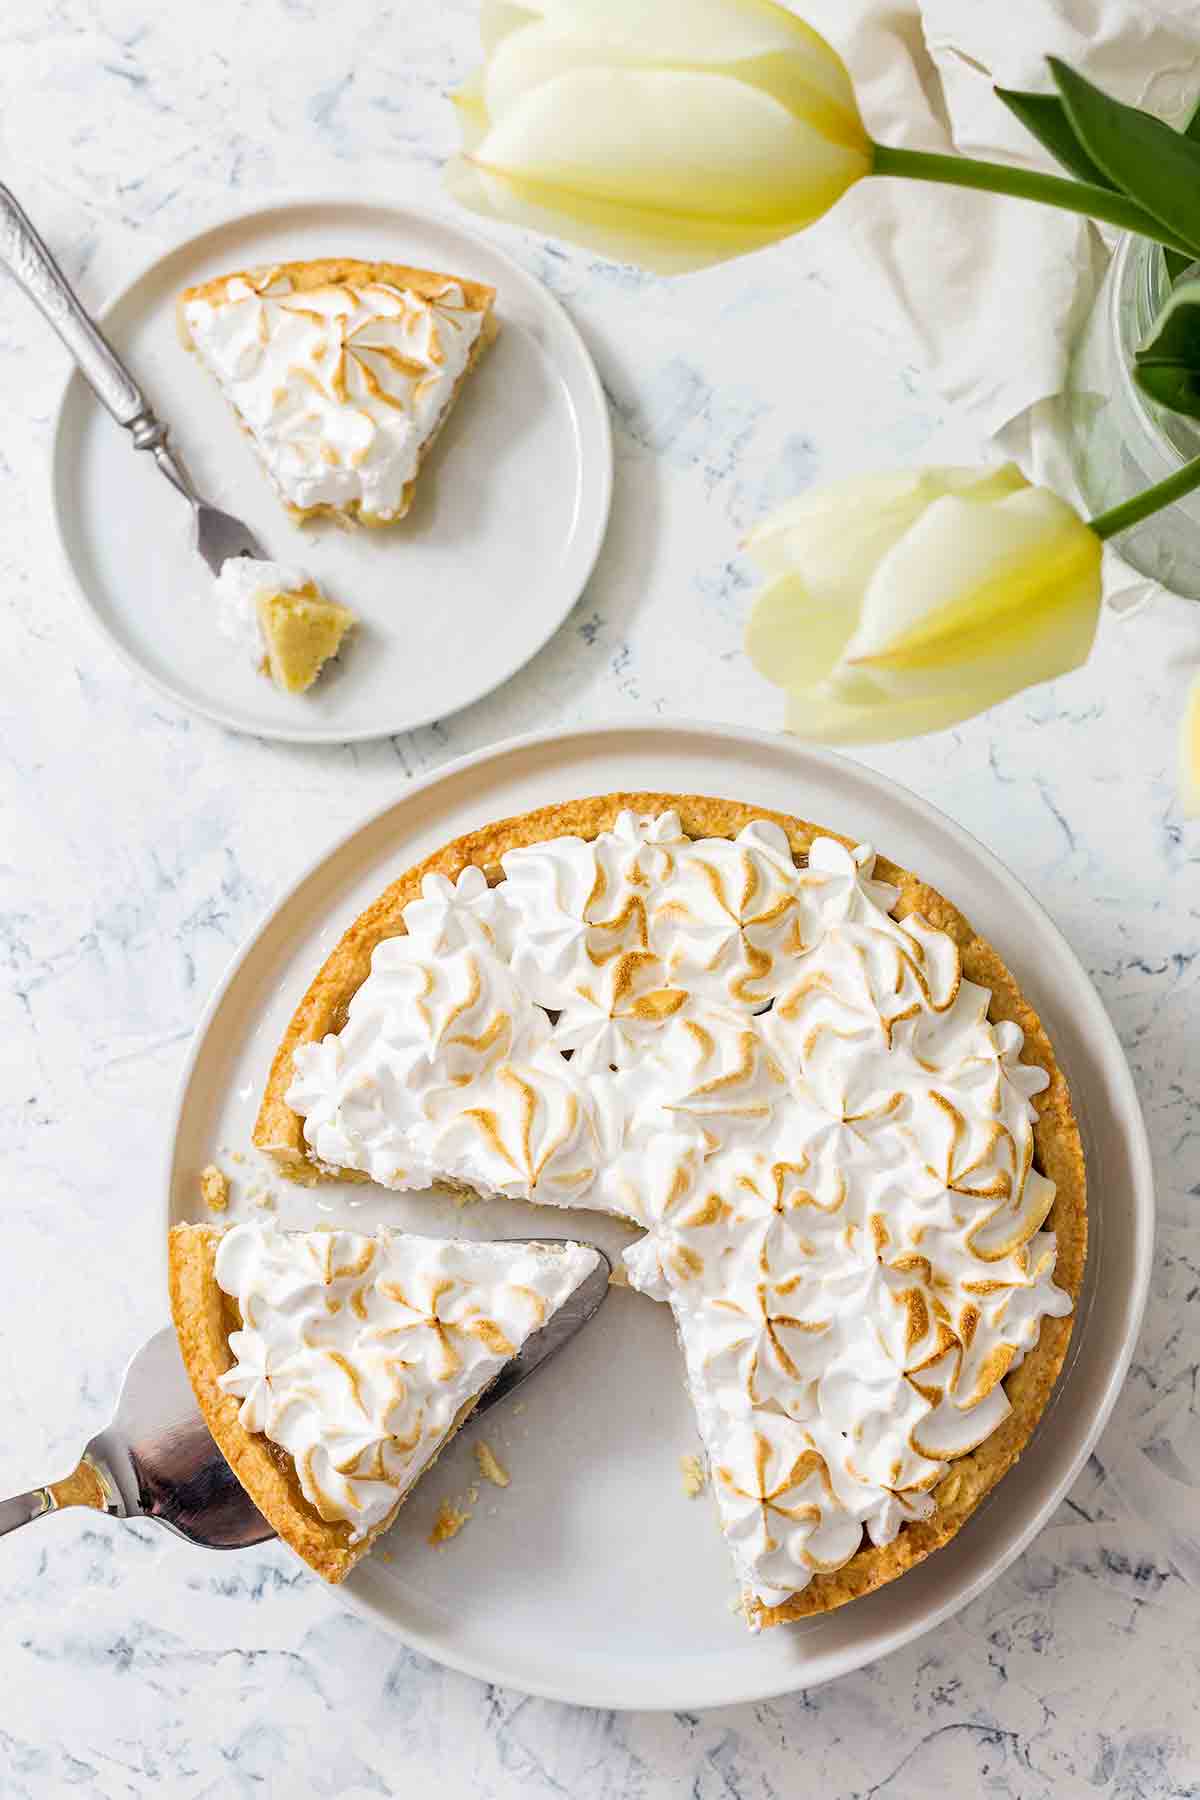 A lemon meringue tart in a white dish, with one slice on a plate beside it and one more being lifted out.